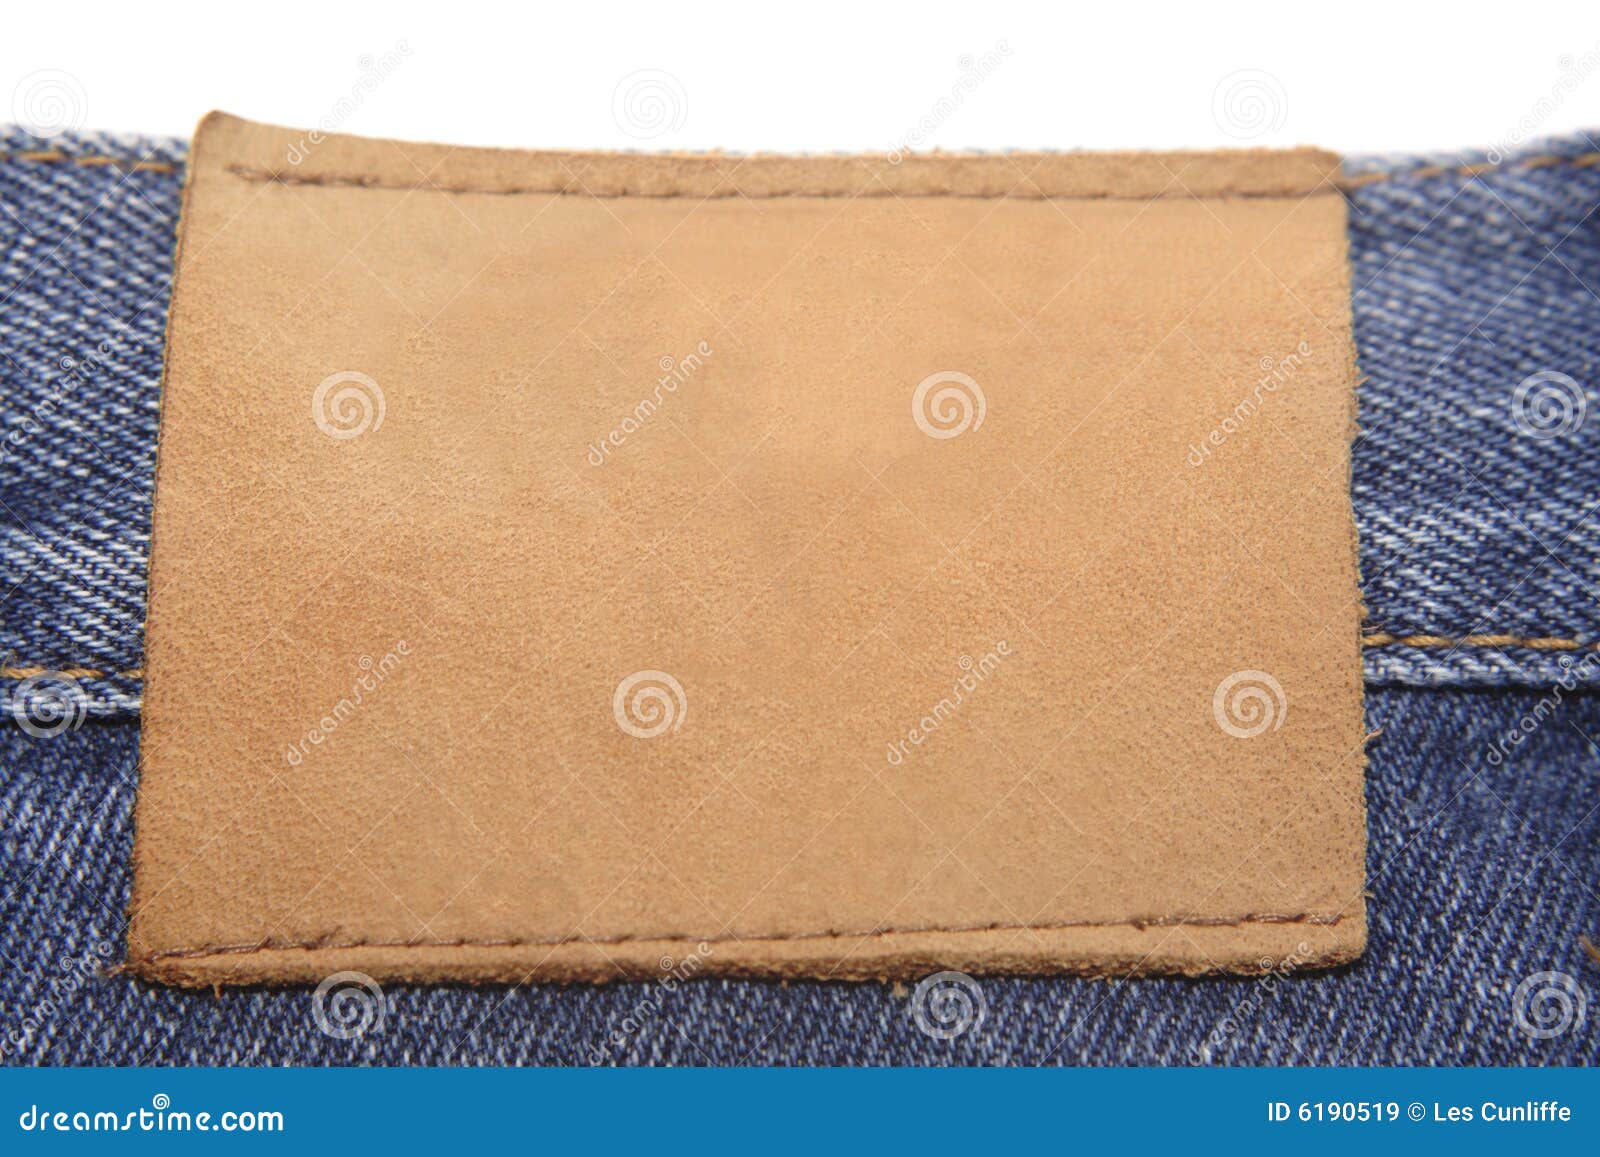 Jeans label stock image. Image of textile, texture, fashion - 6190519